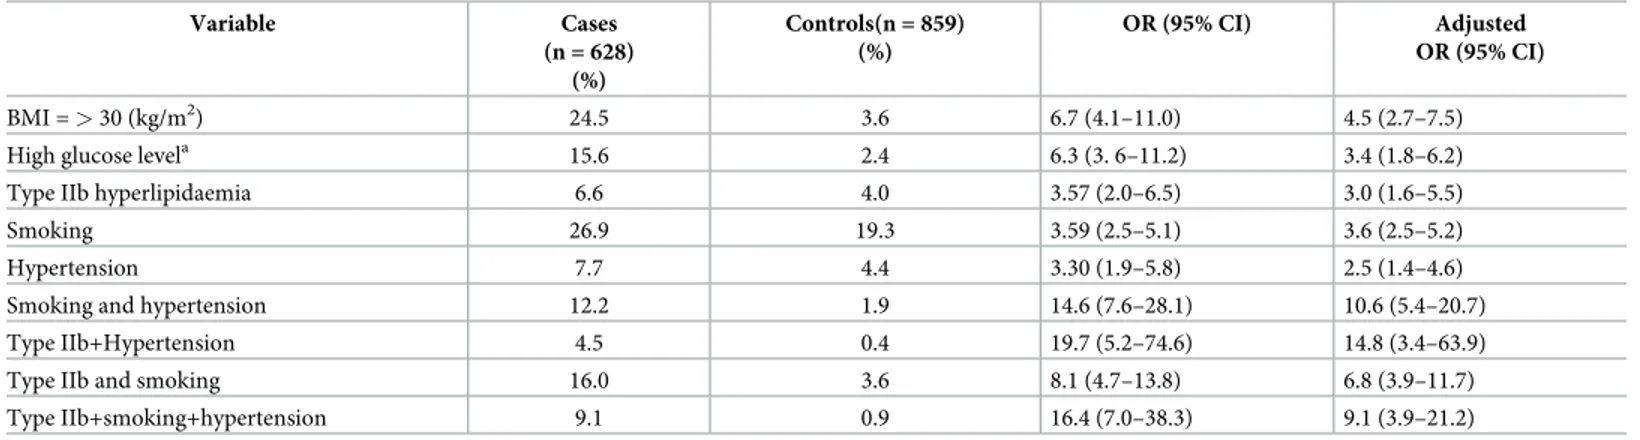 Table 5. Odds ratios (OR) of obesity, high glucose level, and combinations of smoking, hypertension, and type IIb hyperlipidaemia for a cardiovascular event before age 50 years in cases and controls.